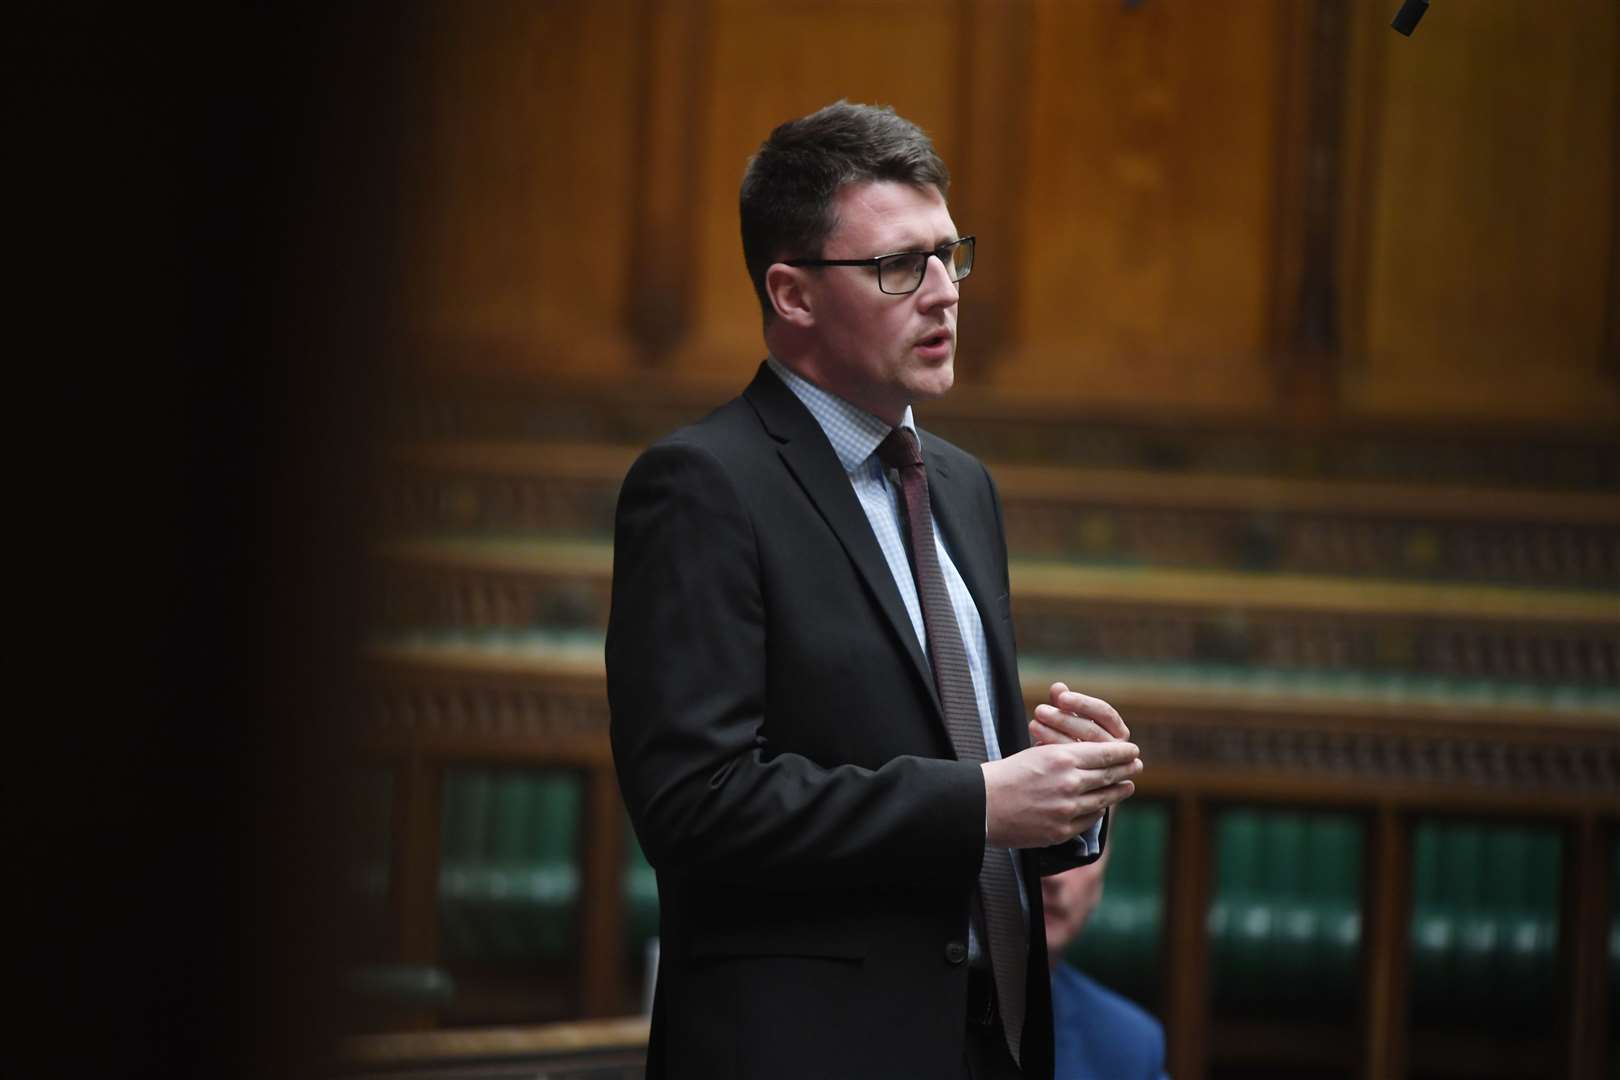 SNP MP David Linden said families need more help with rising costs (UK Parliament/Jessica Taylor)